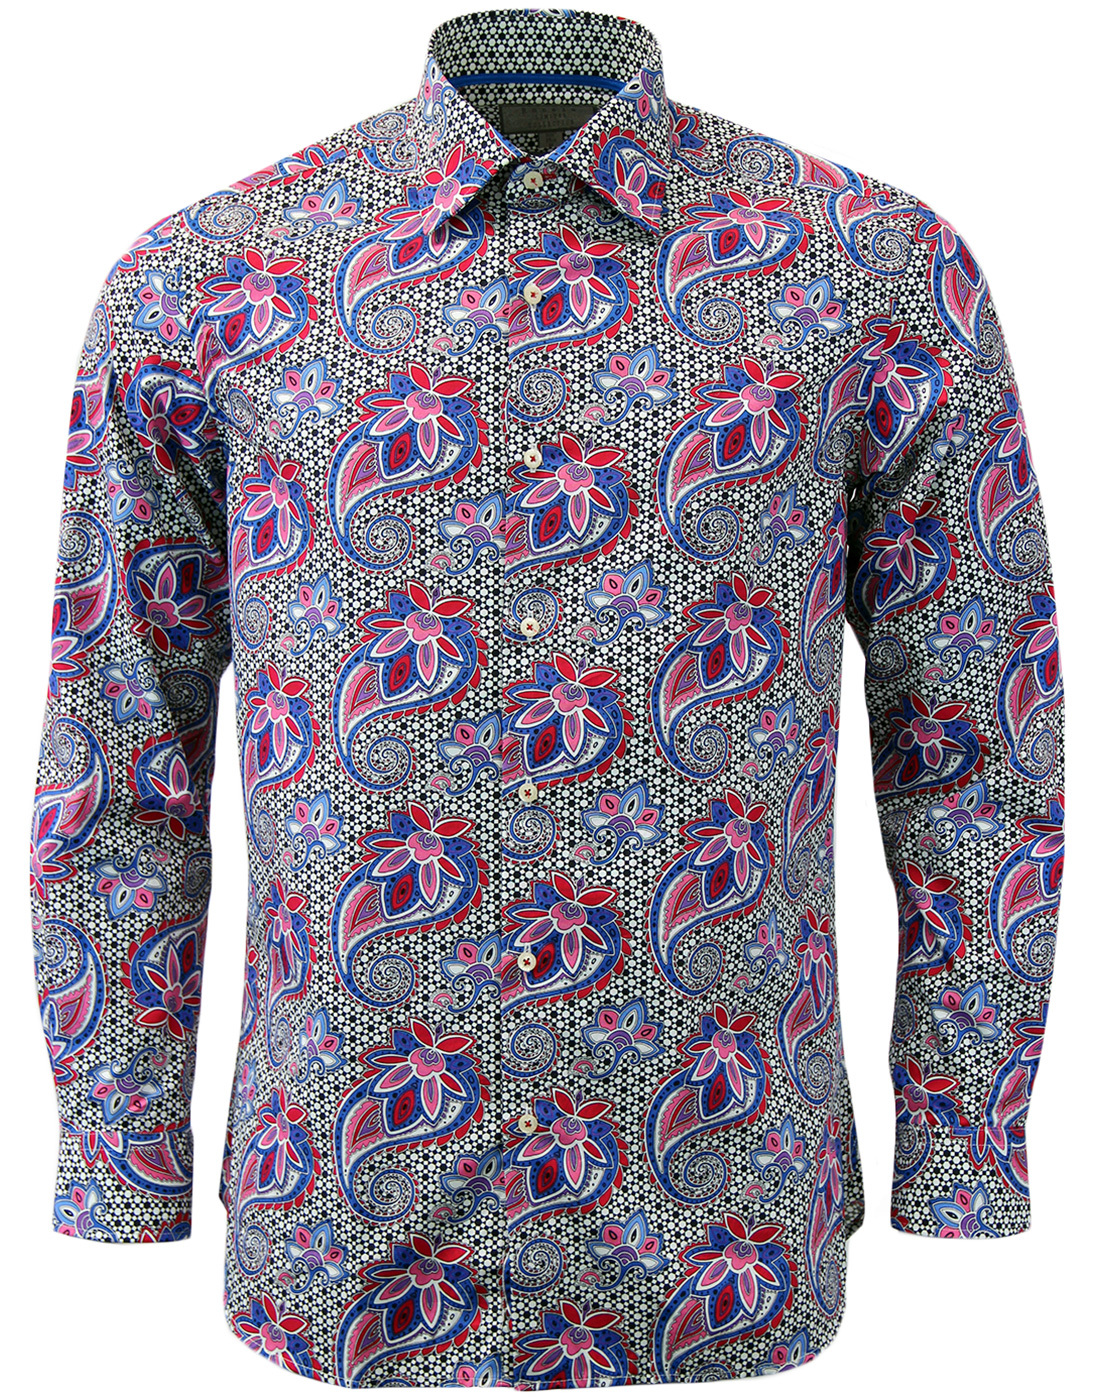 ROCOLA Retro Sixties Abstract Paisley Op Art Shirt in Blue/Red